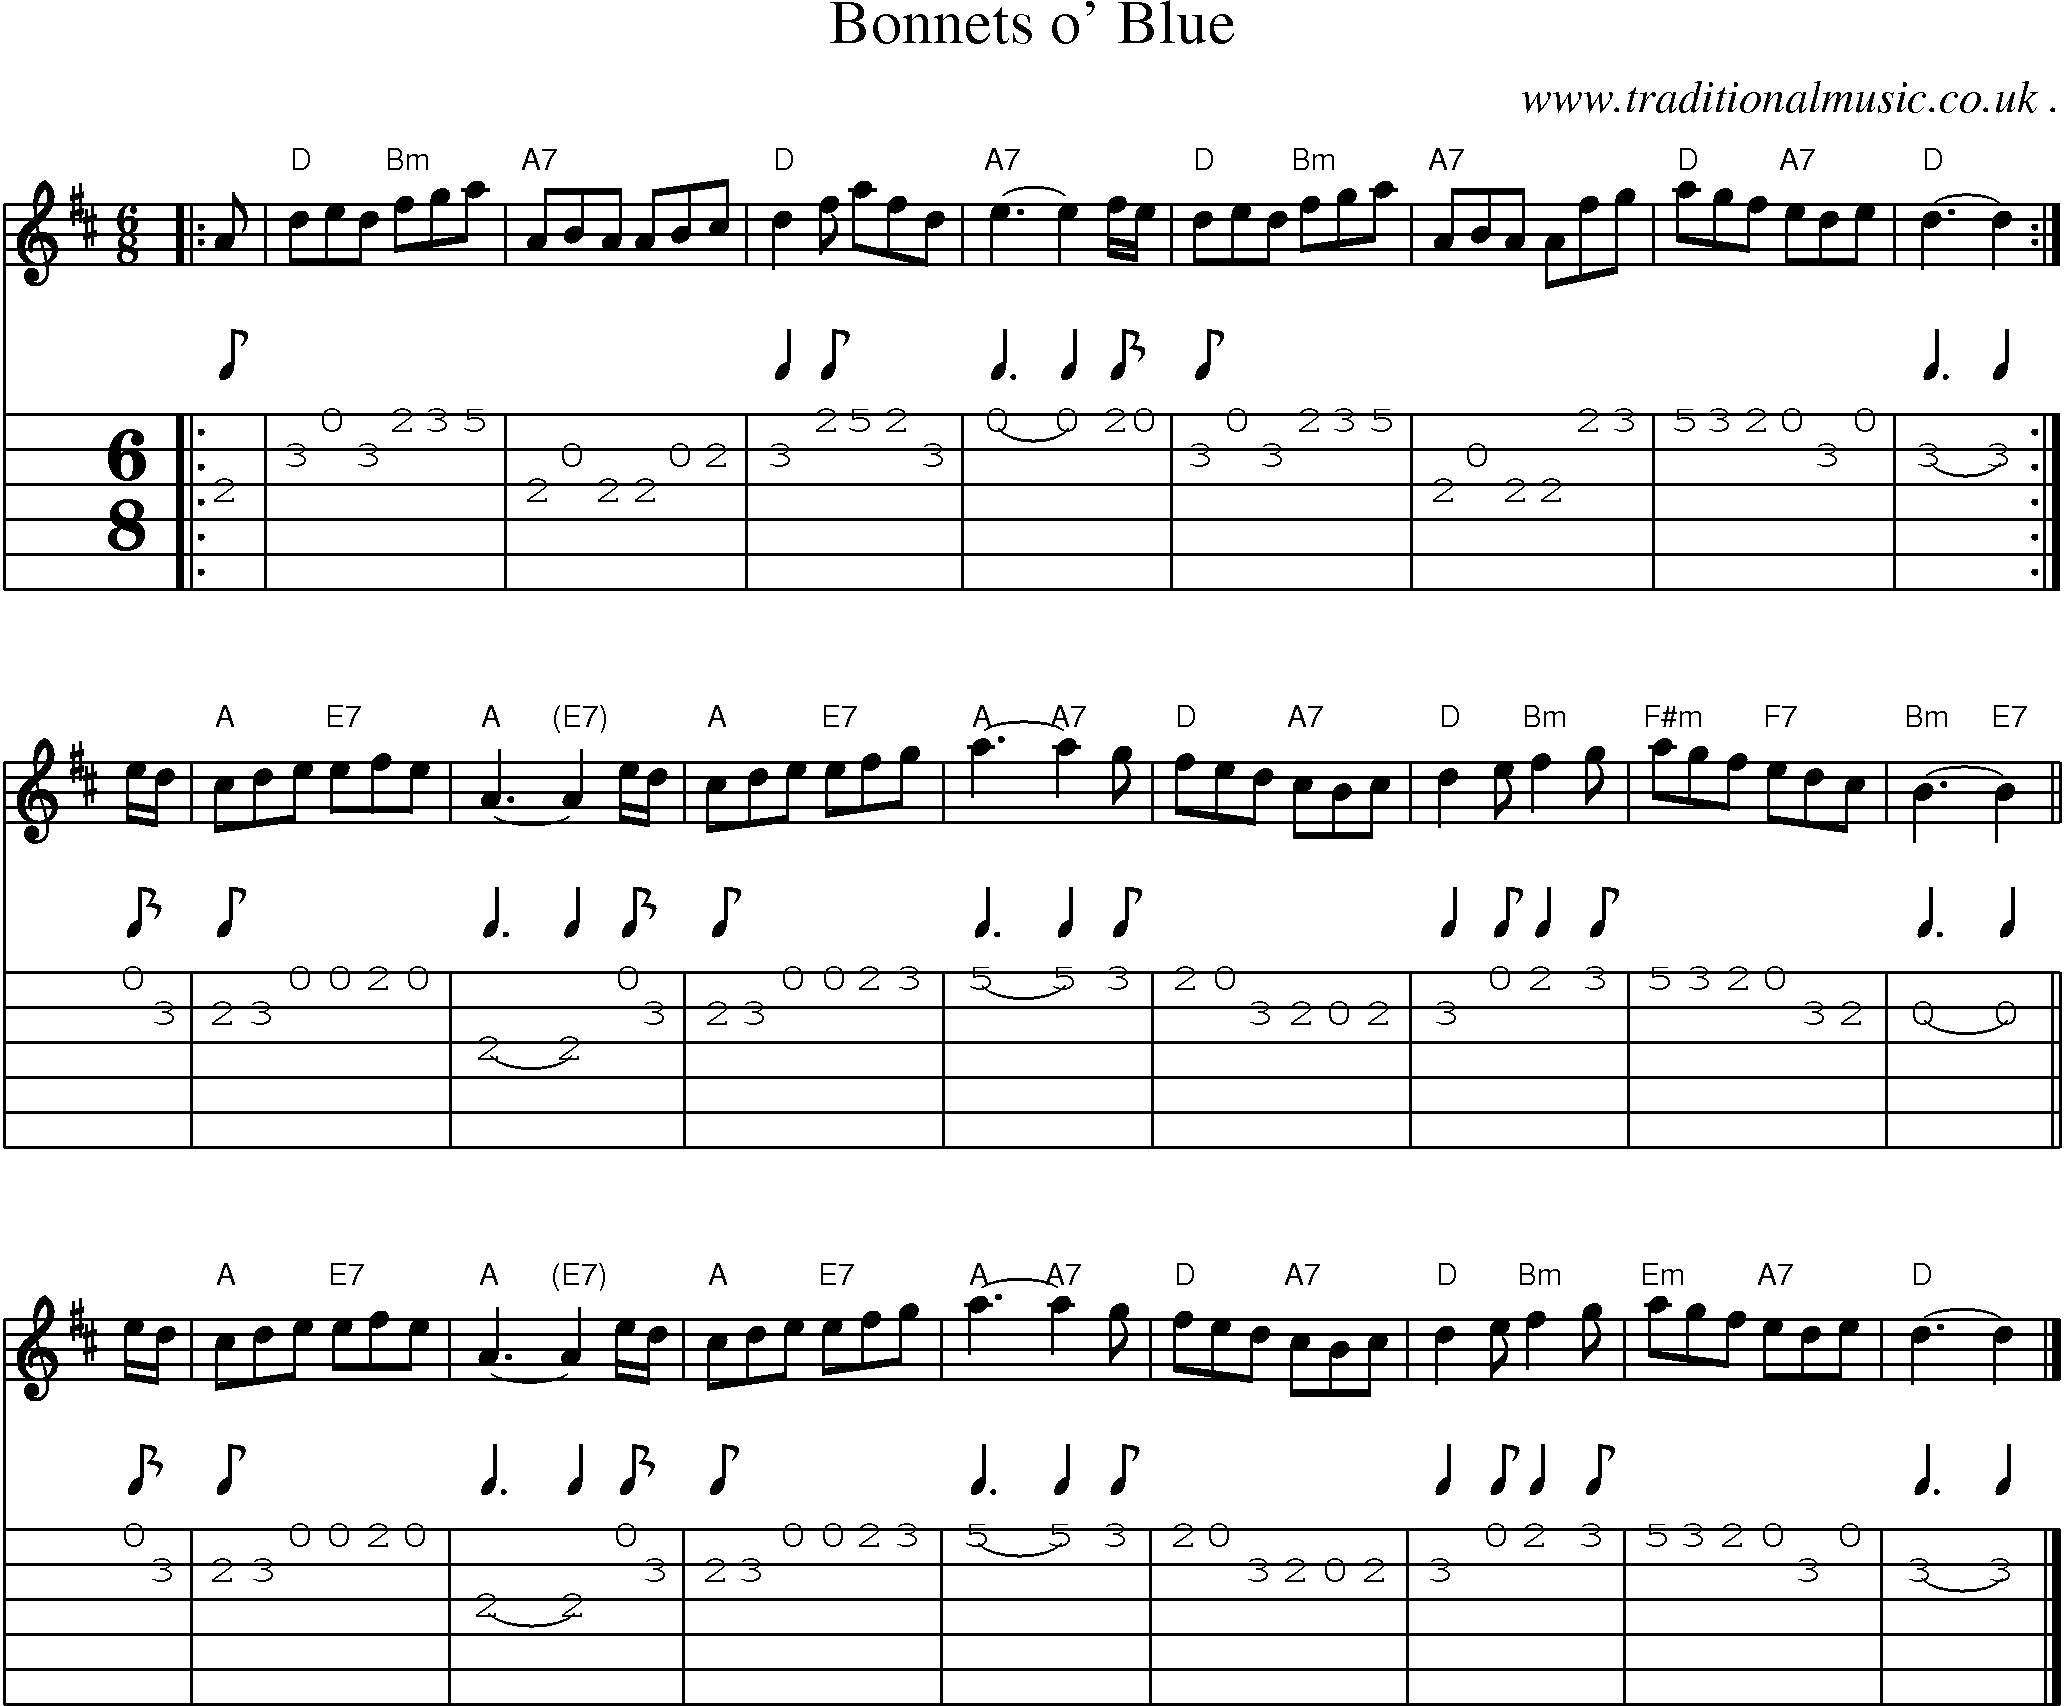 Sheet-music  score, Chords and Guitar Tabs for Bonnets O Blue